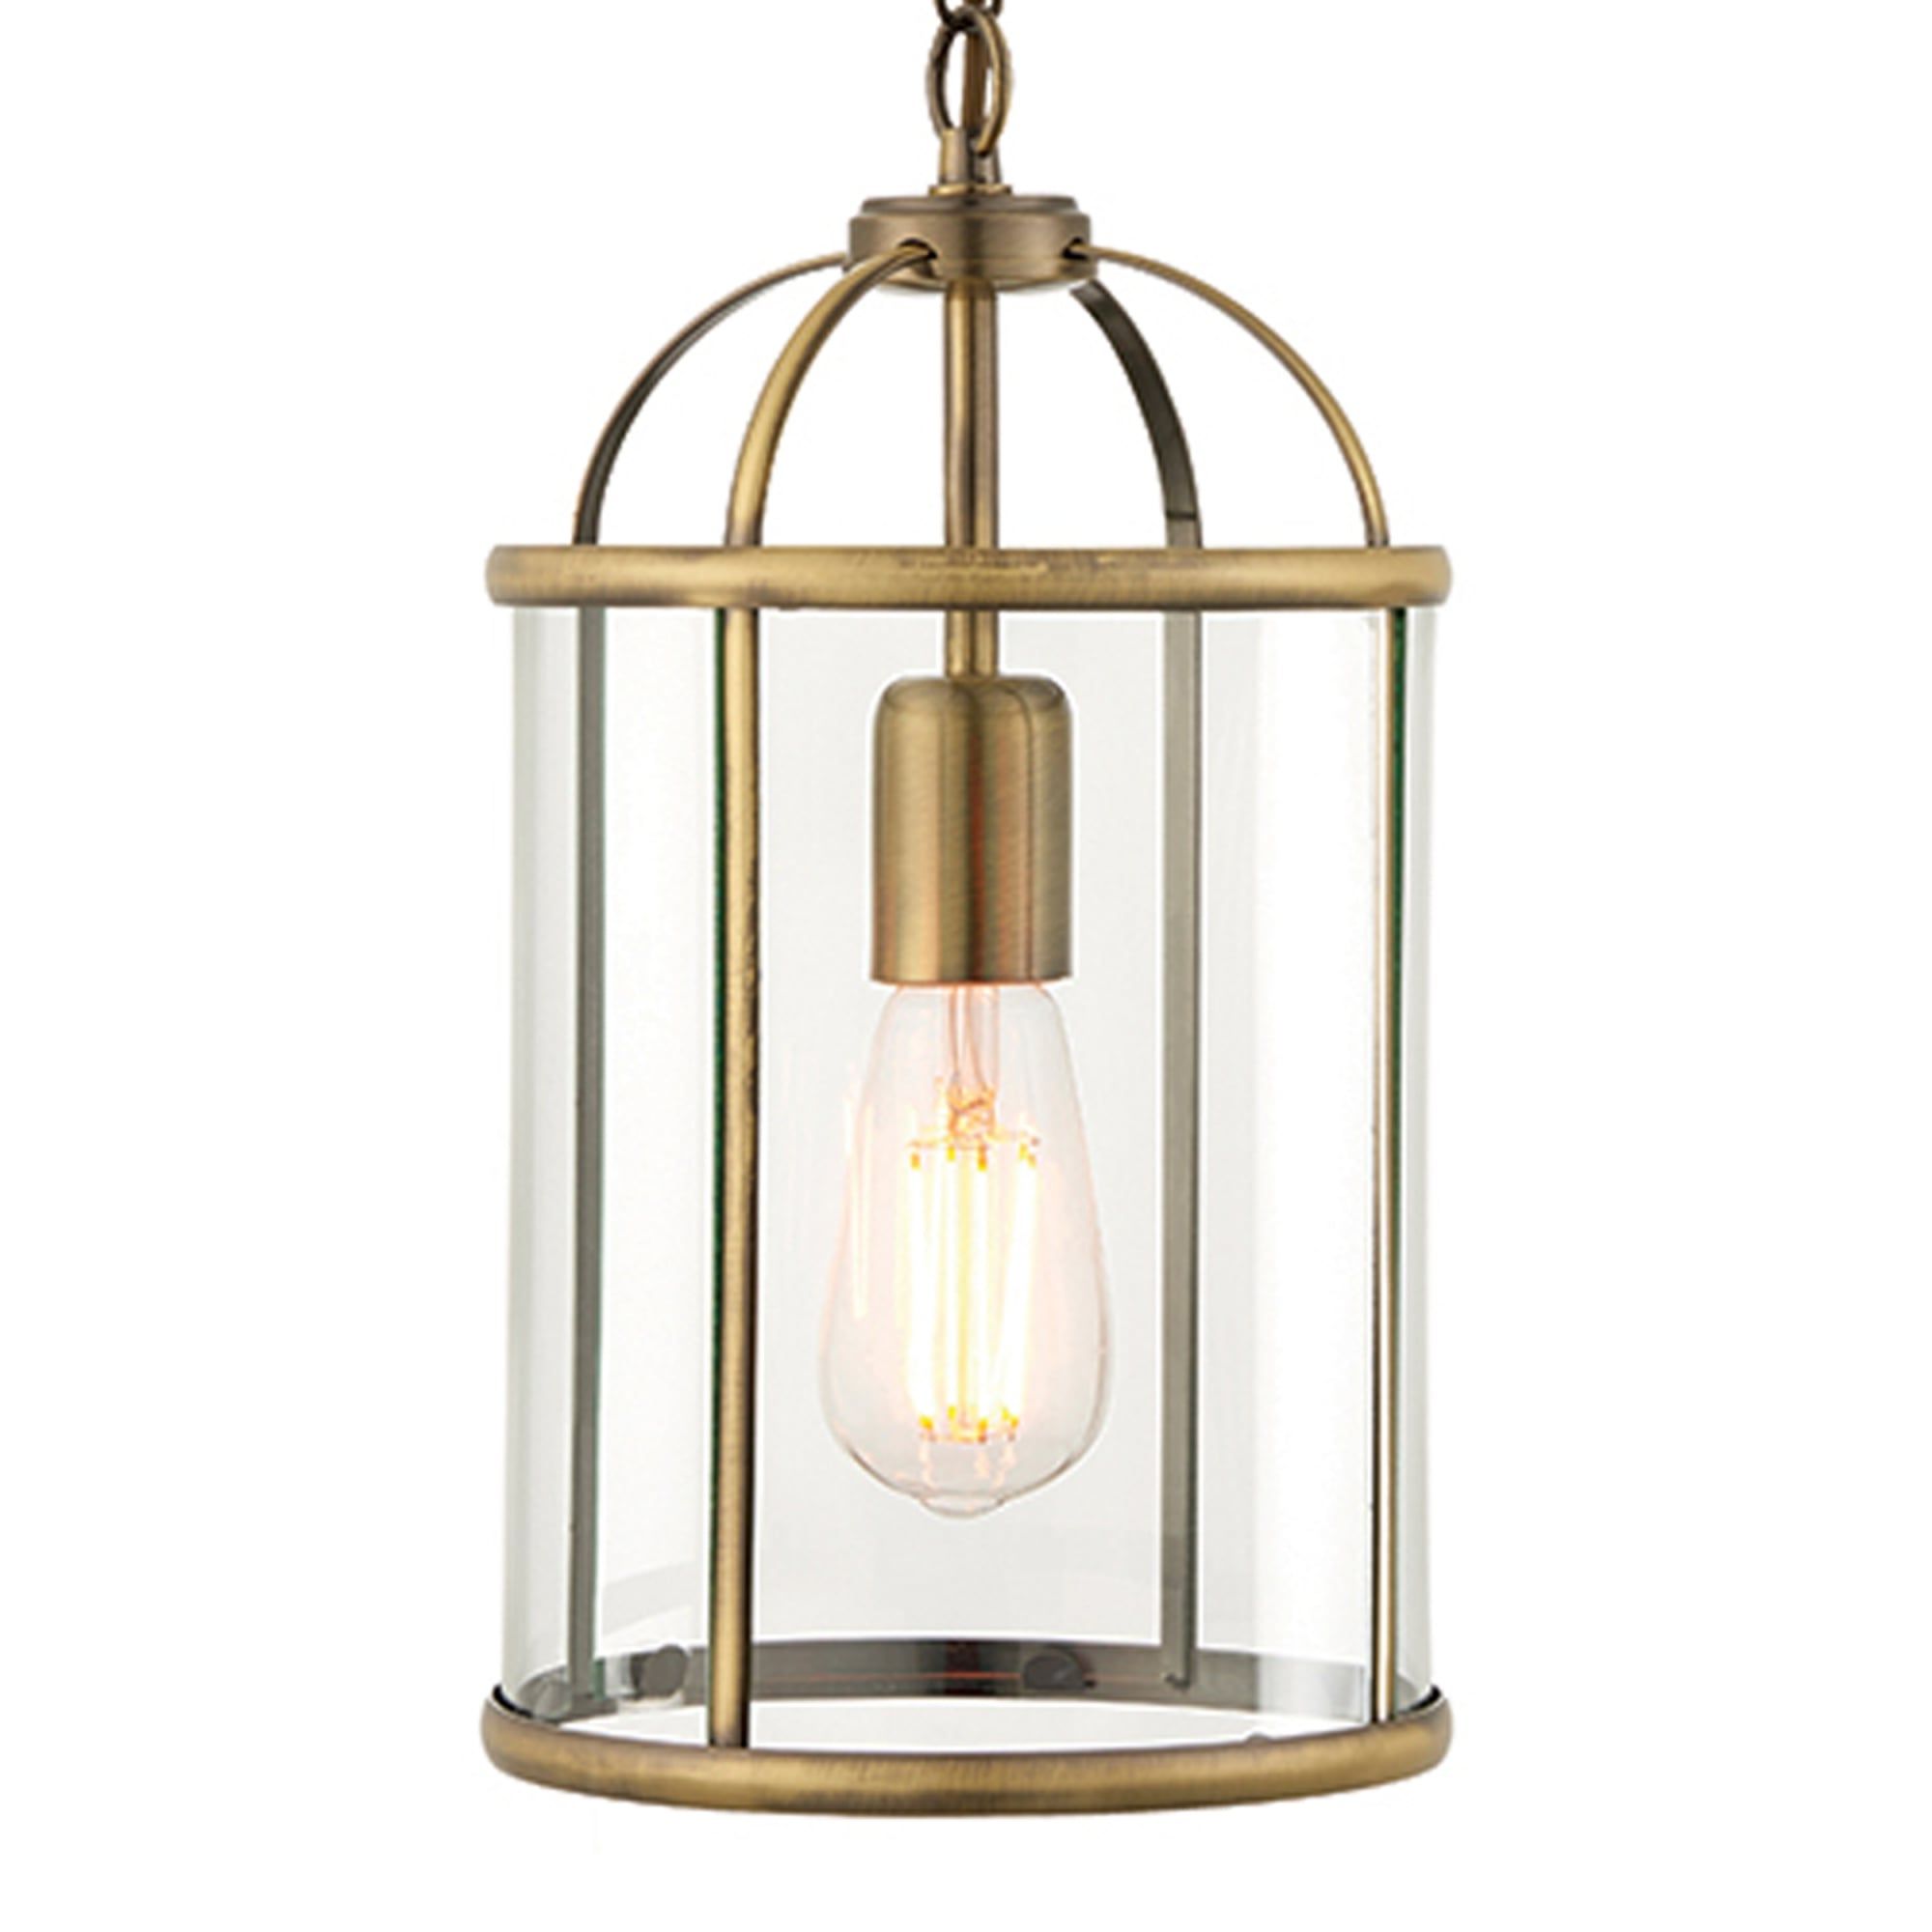 Aged Brass Lantern Chandeliers Pertaining To Popular Endon 69454 Lambeth 1 Light Antique Brass And Glass Lantern Pendant (View 7 of 15)